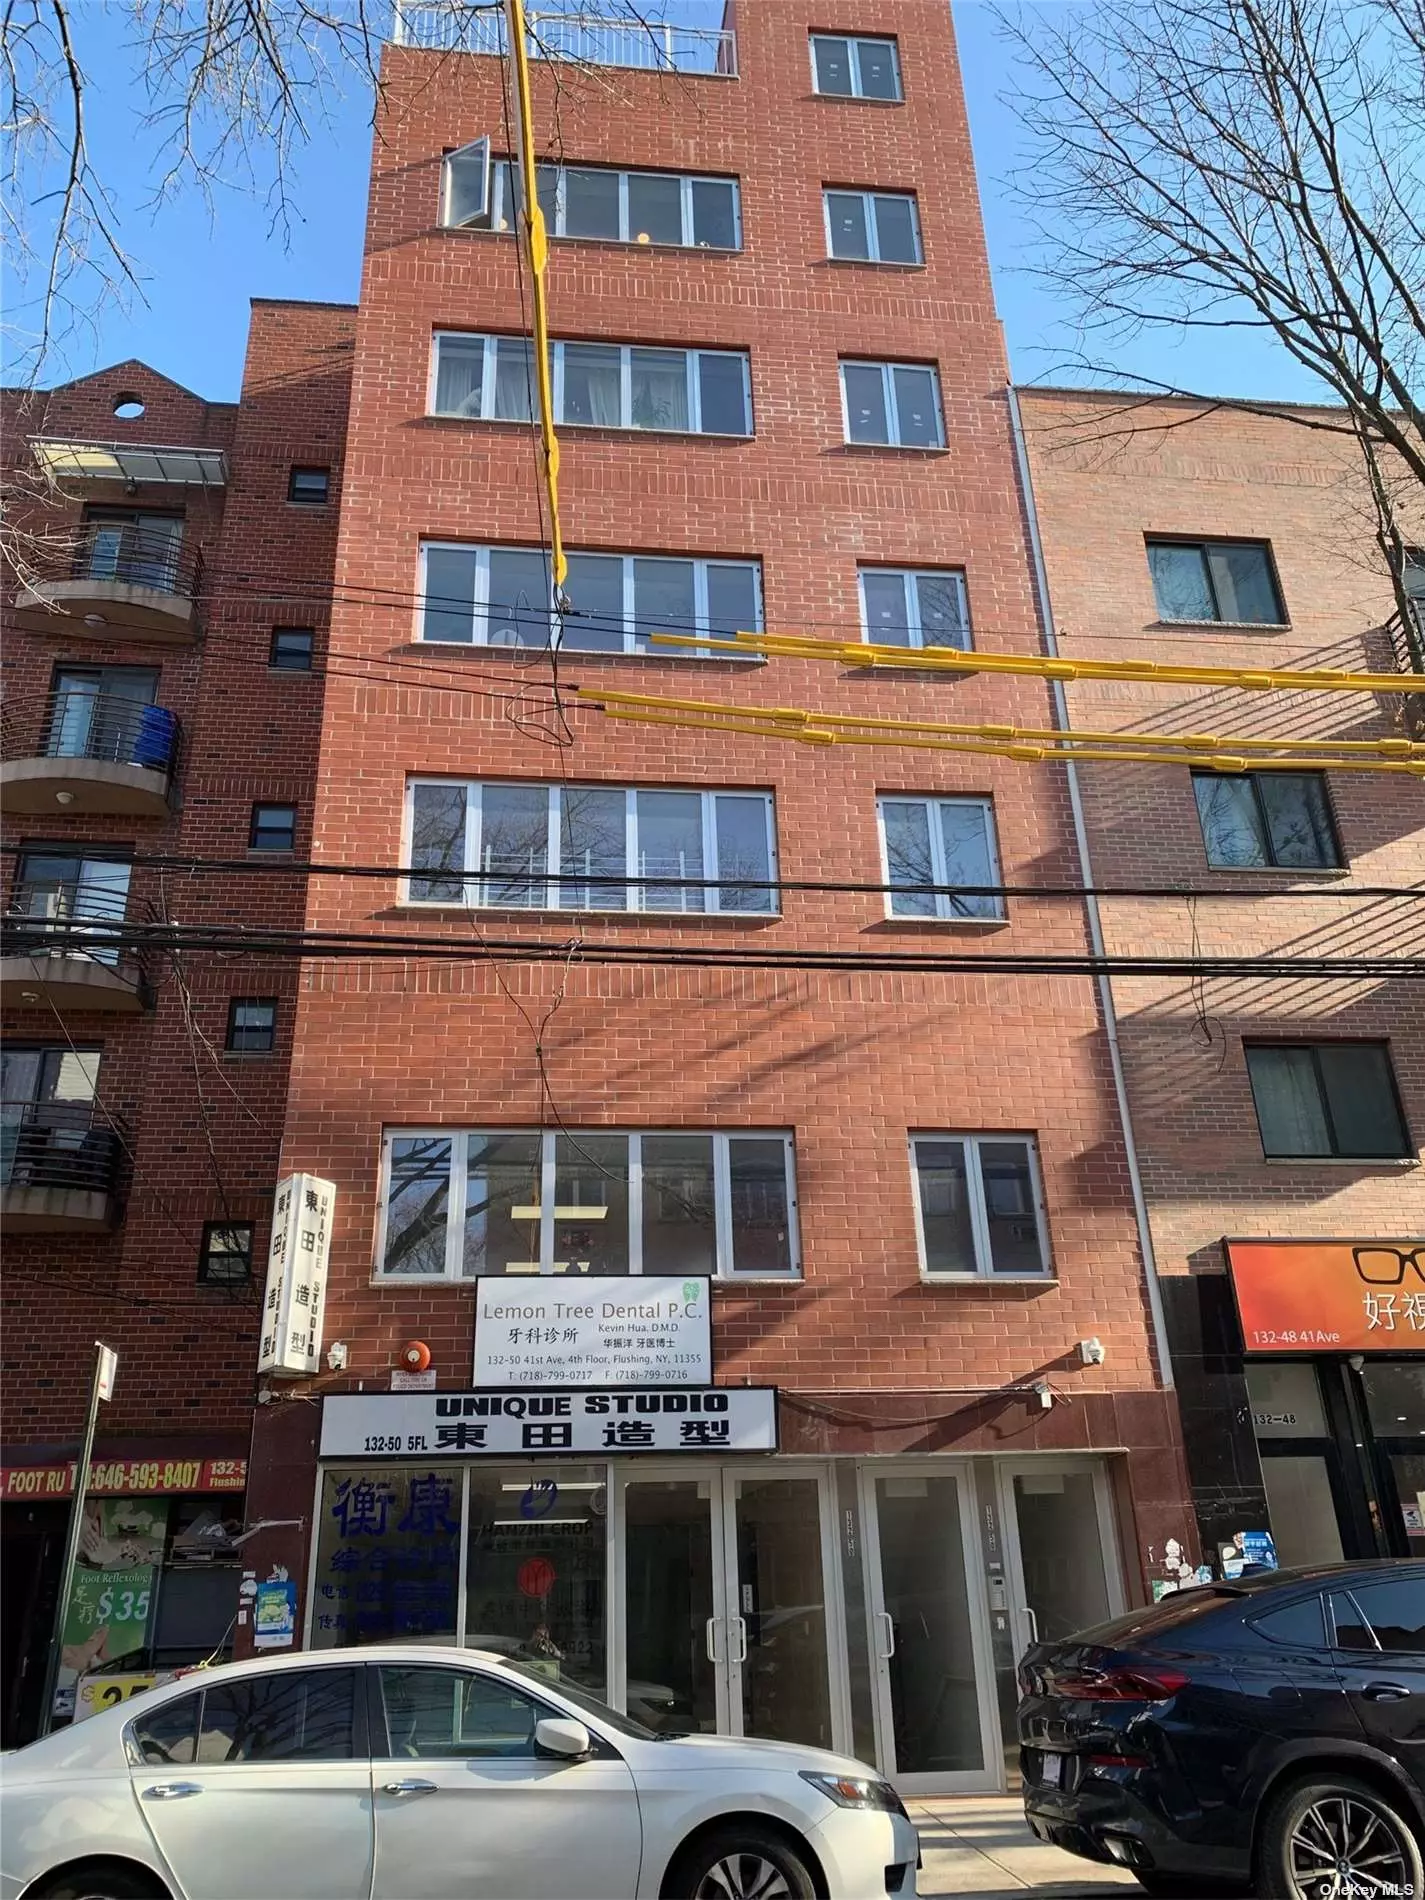 6 floors of offices, 6 store/offices+ finished basement, Central AC, Elevator, three exits each floor, great income/high ROI. Maintenance fee $400 per floor (total 6 floors)